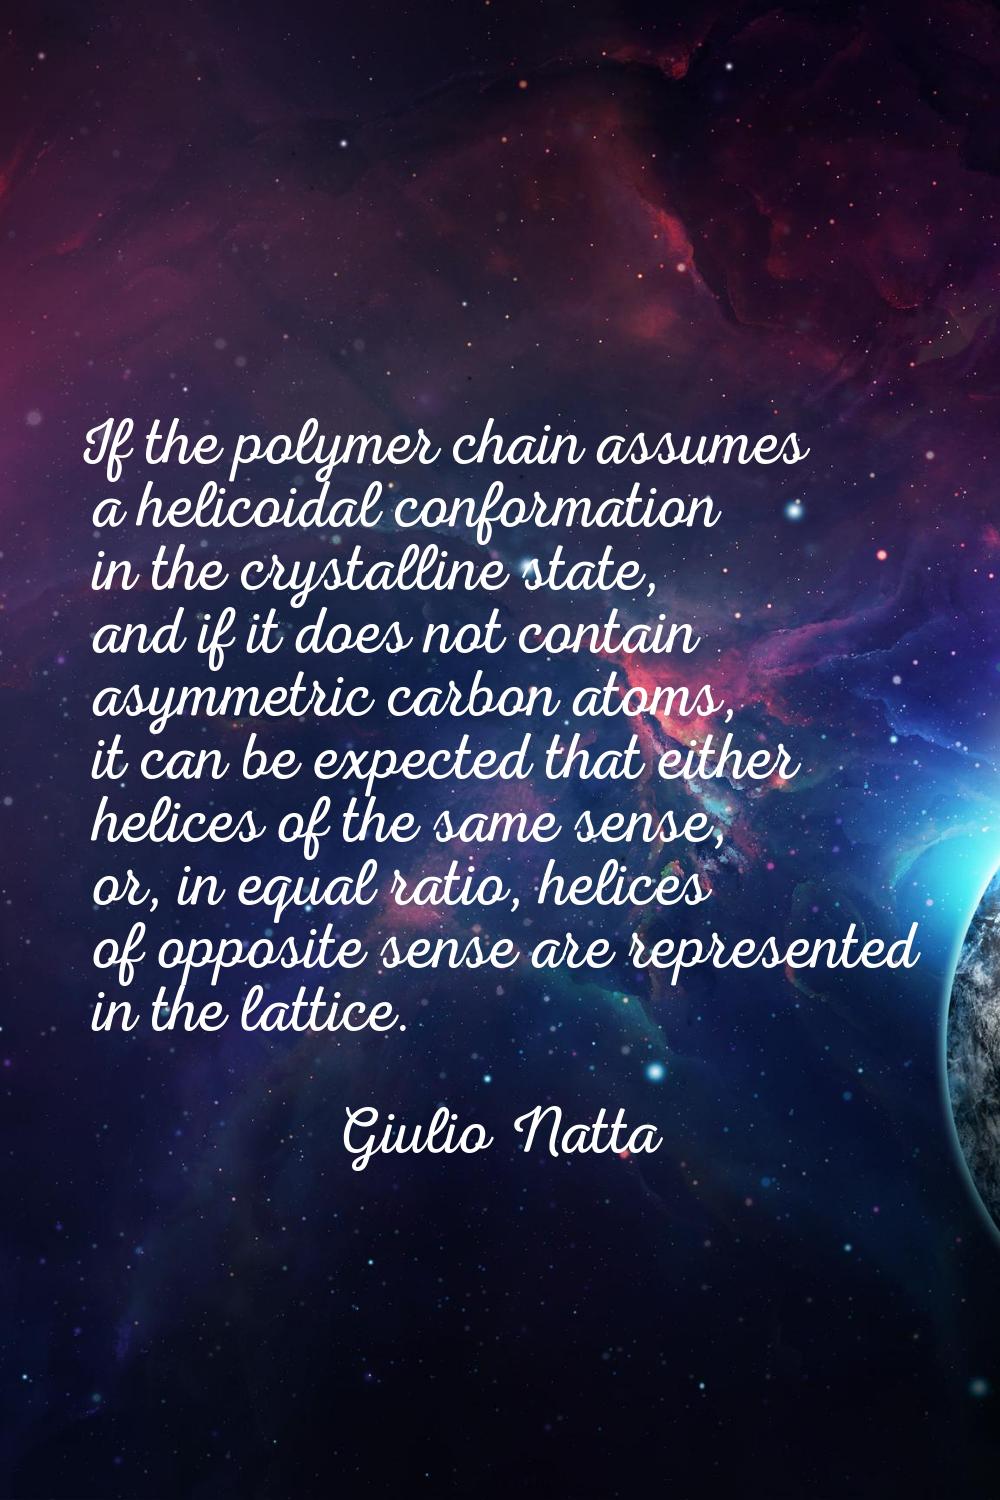 If the polymer chain assumes a helicoidal conformation in the crystalline state, and if it does not